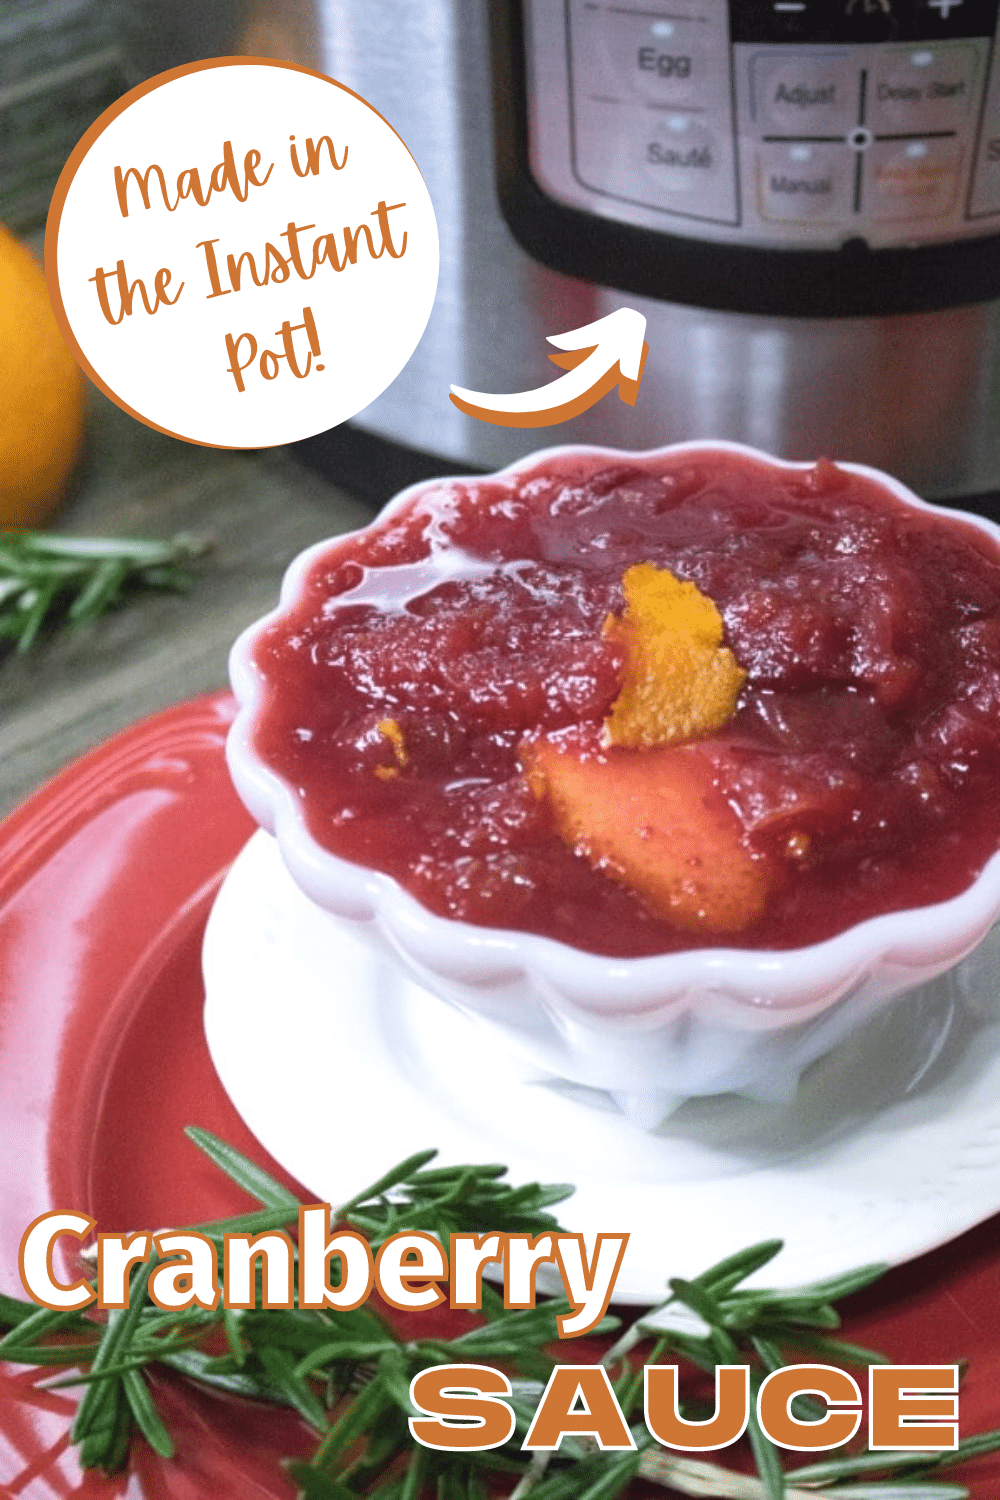 This Instant Pot Cranberry Sauce is delicious and even easier than making it on the stovetop. #sidedish #Thanksgiving #cranberries via @wondermomwannab